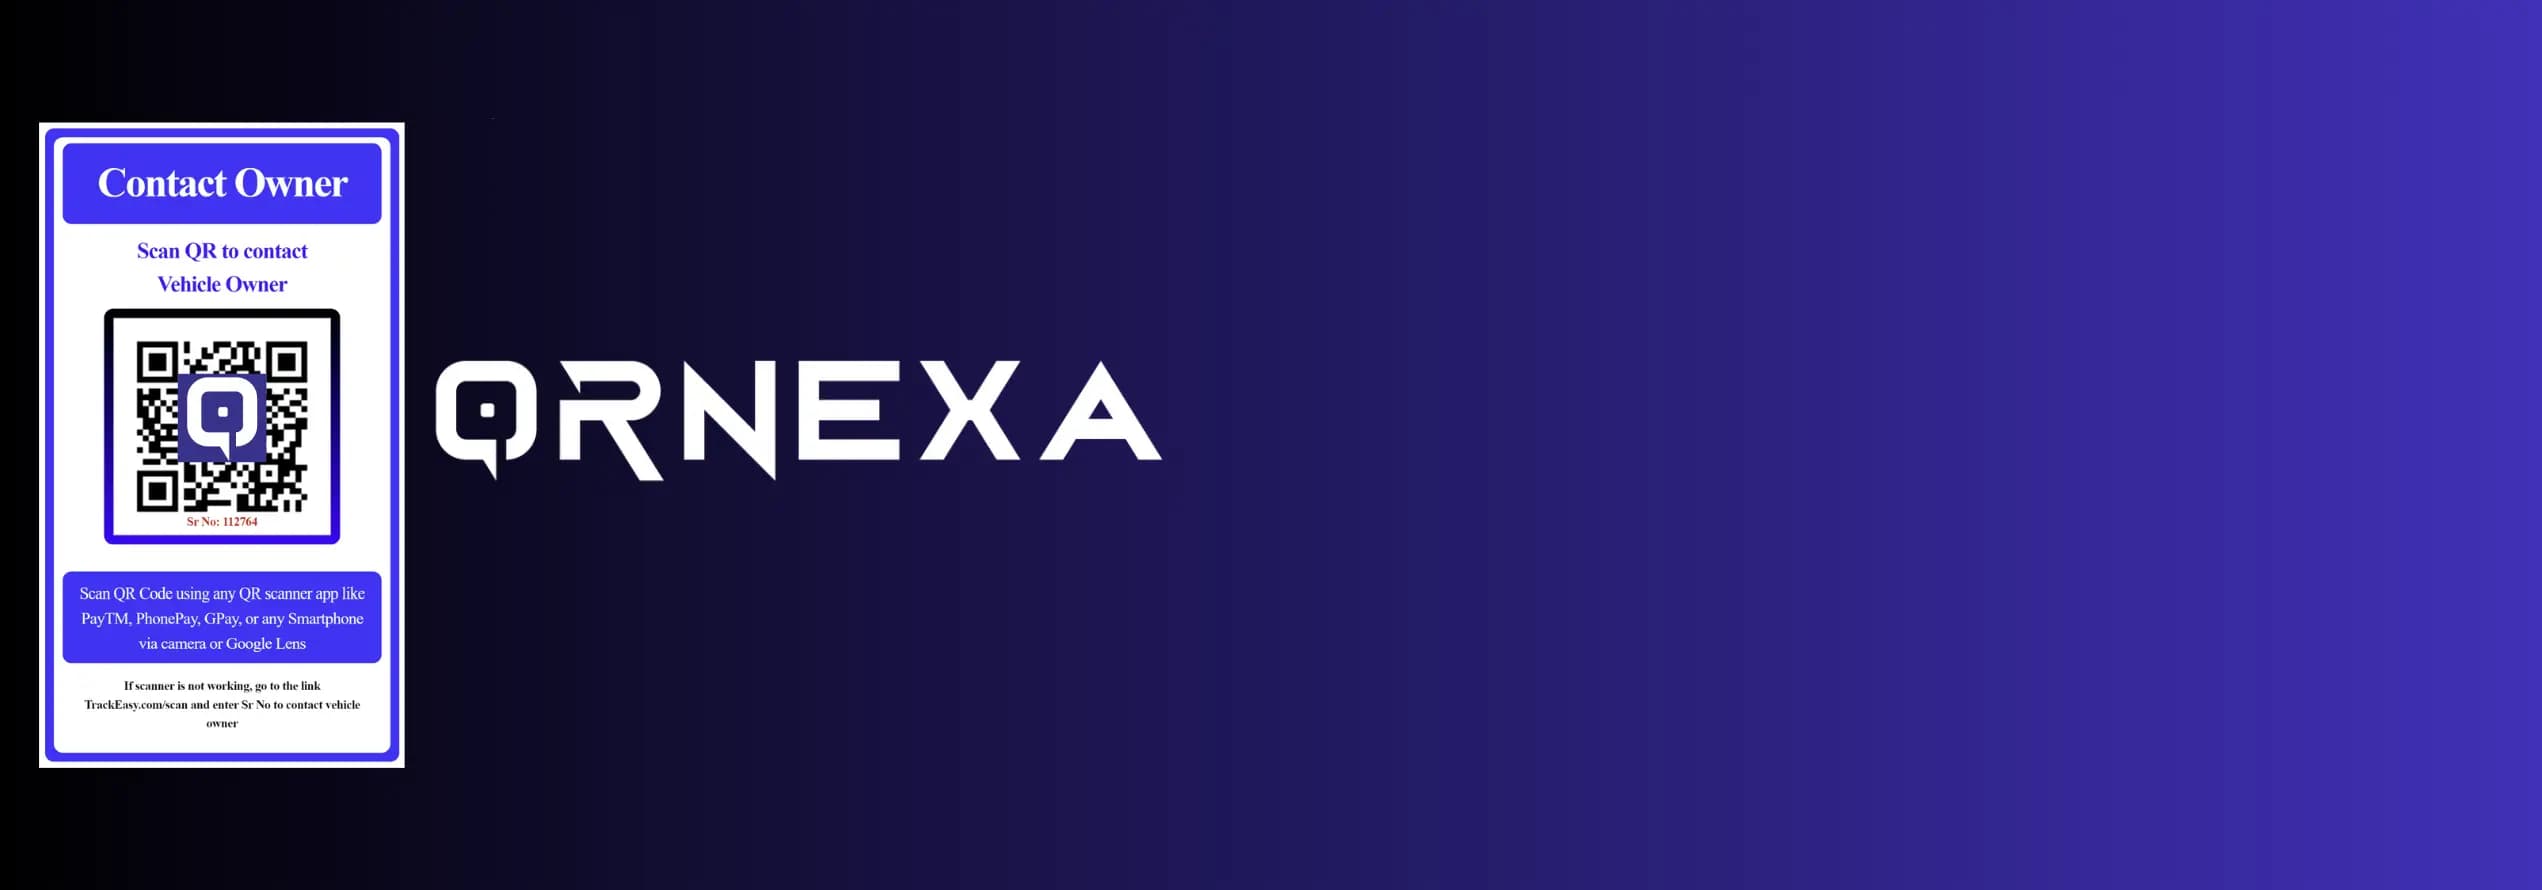 QRNexa - About Us Page (A vehicle owner smart QR sticker for vehicles)